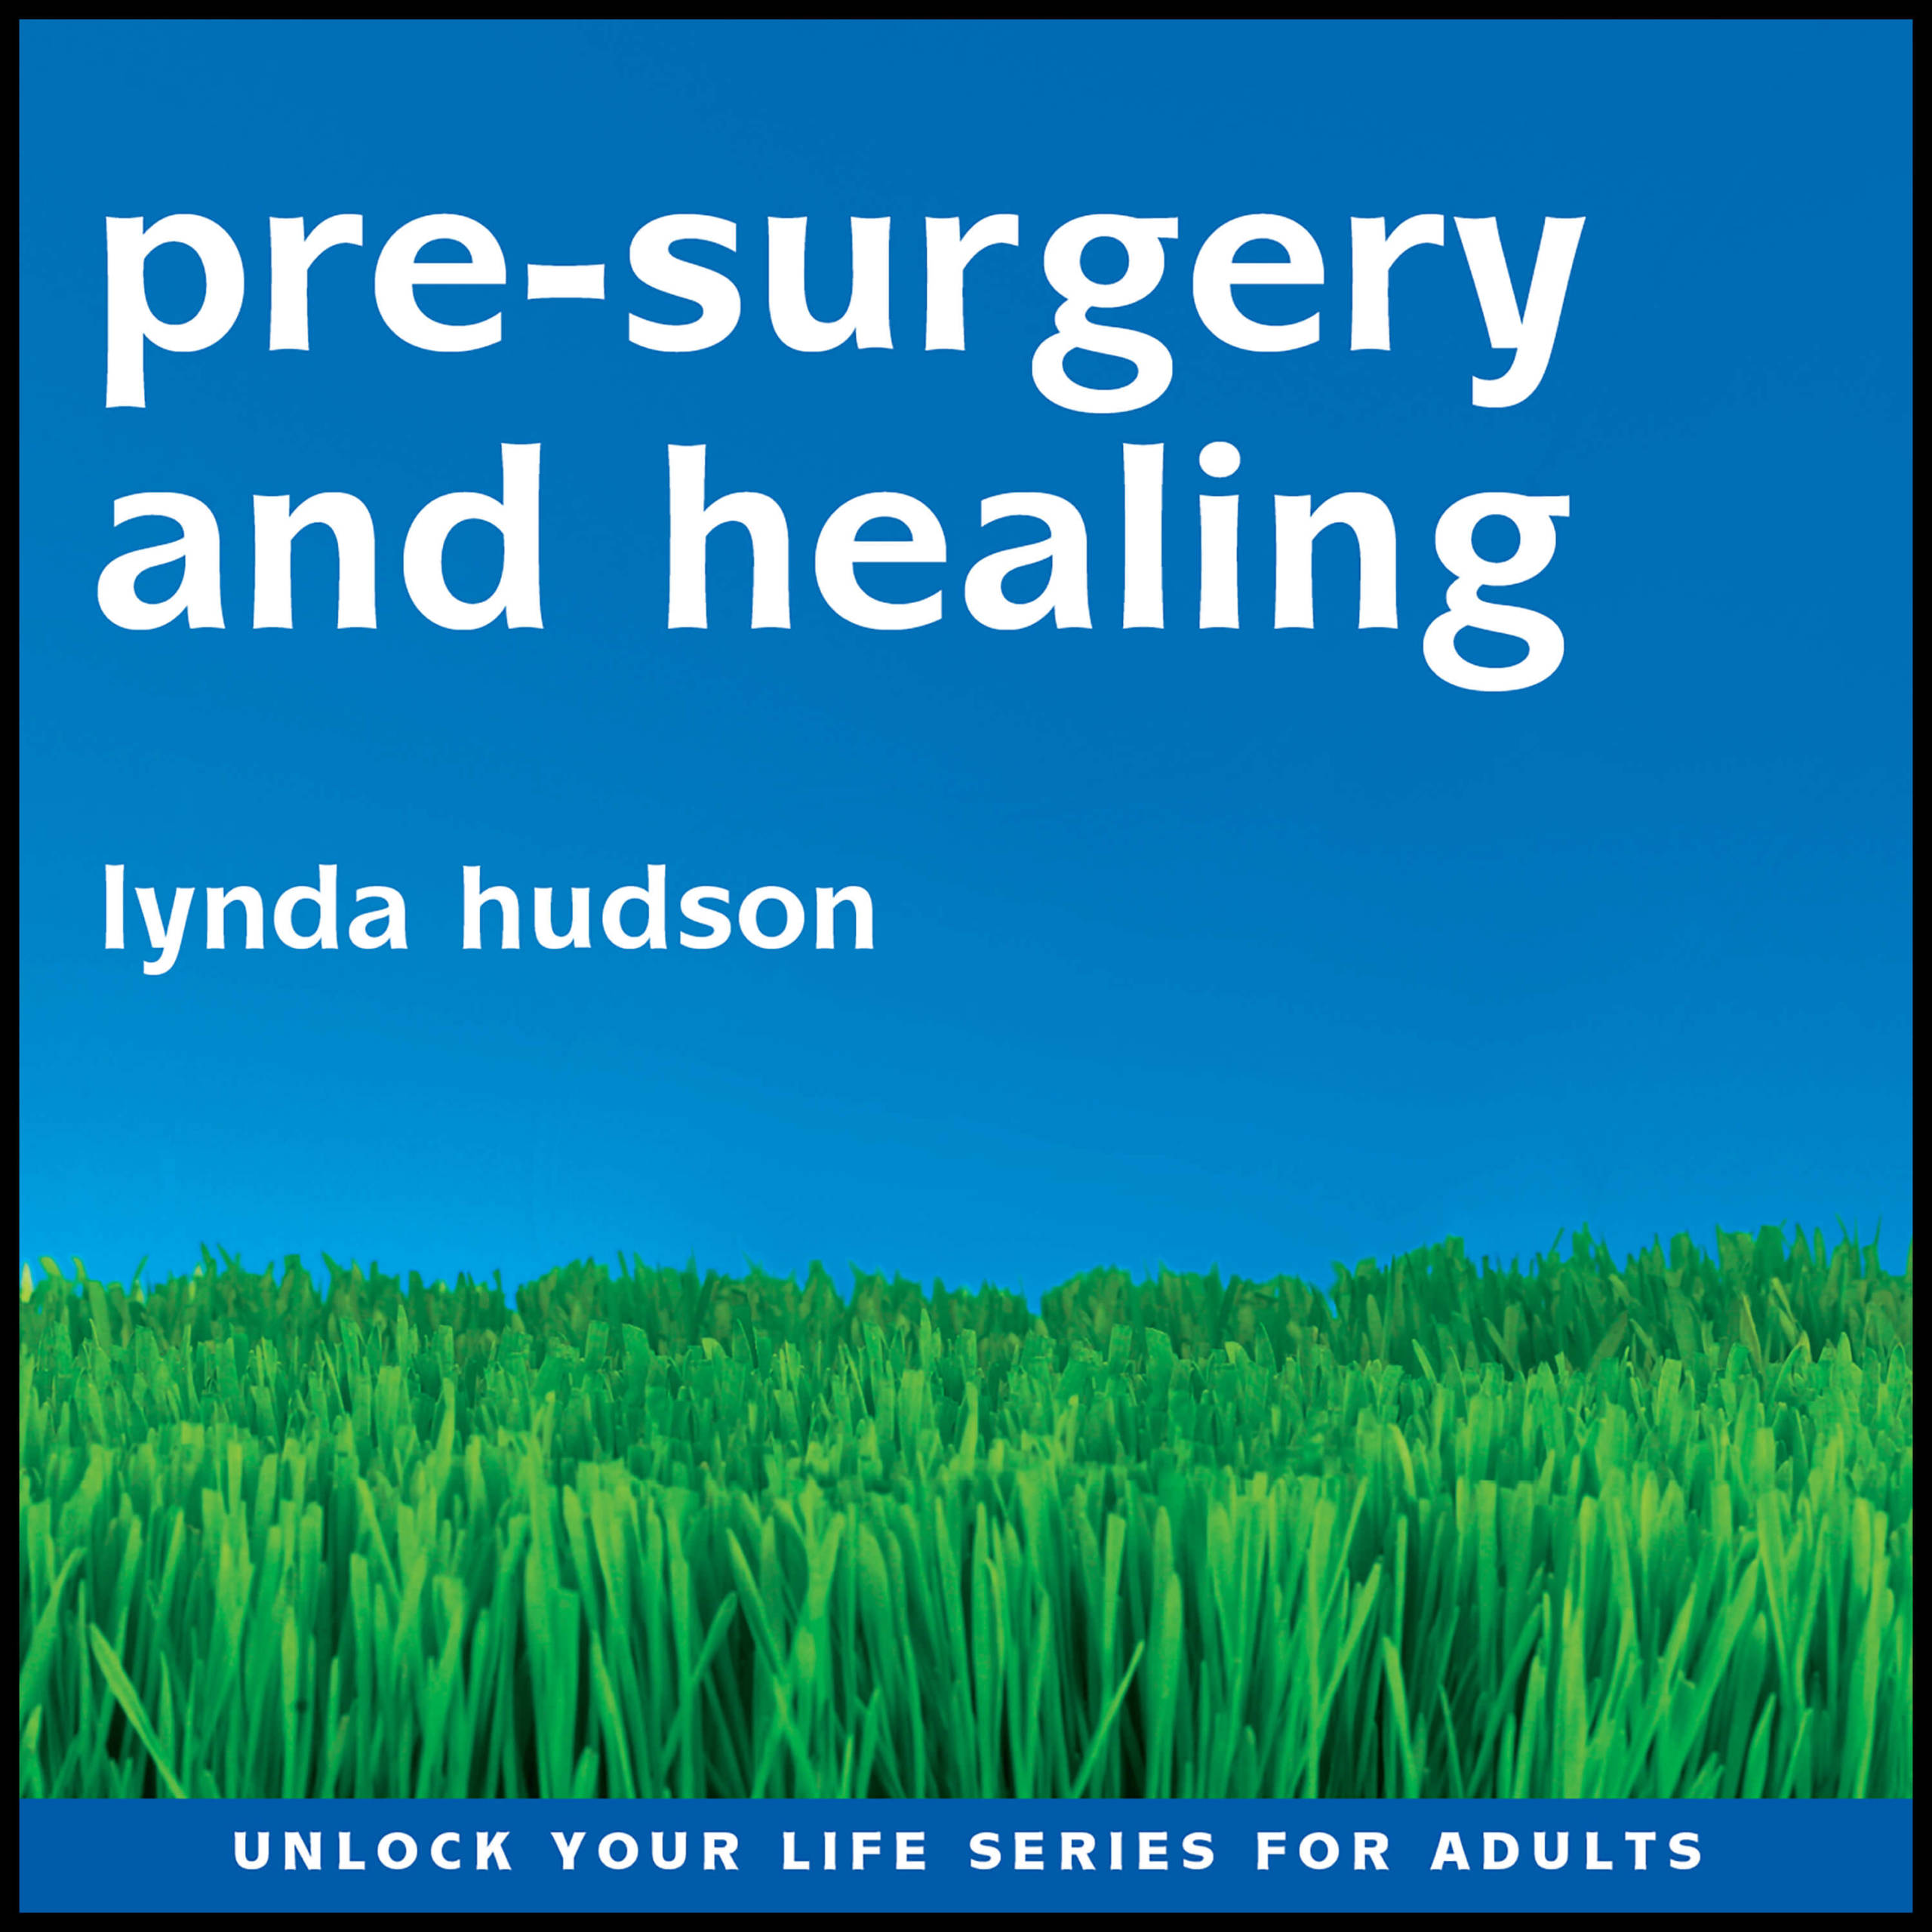 Pre-Surgery and Healing